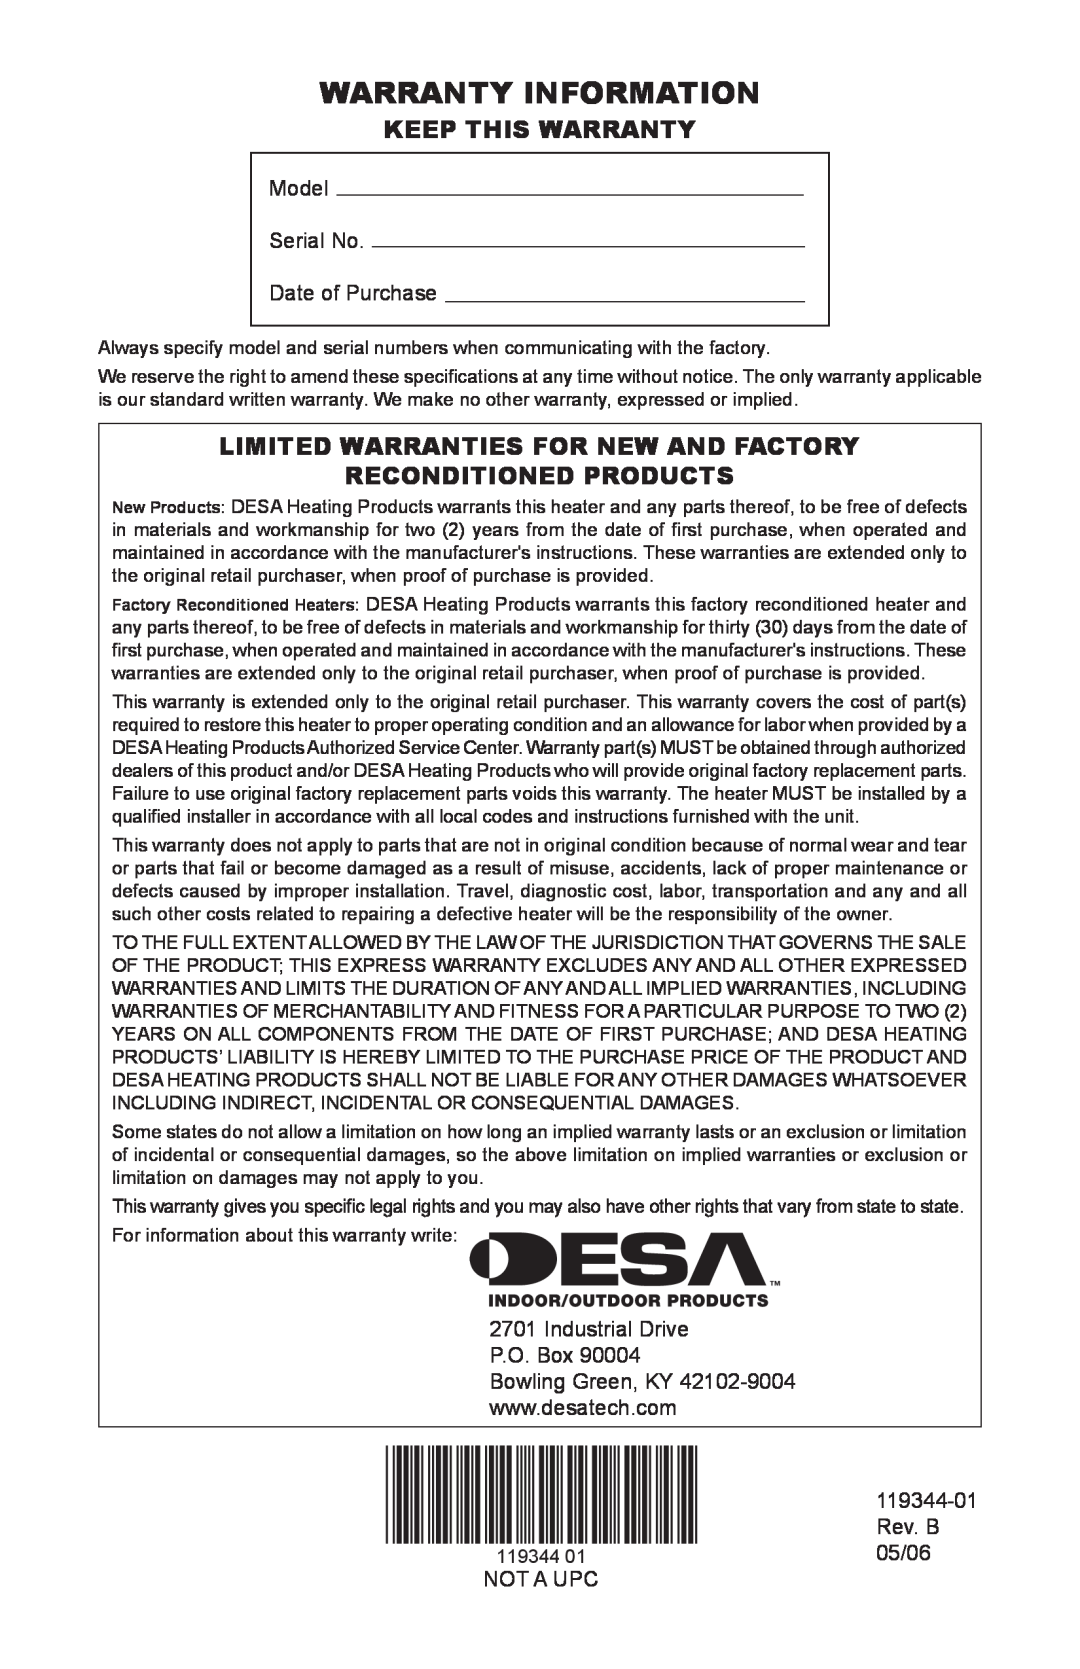 Desa WMP20A Warranty Information, Keep This Warranty, Limited Warranties For New And Factory Reconditioned Products 